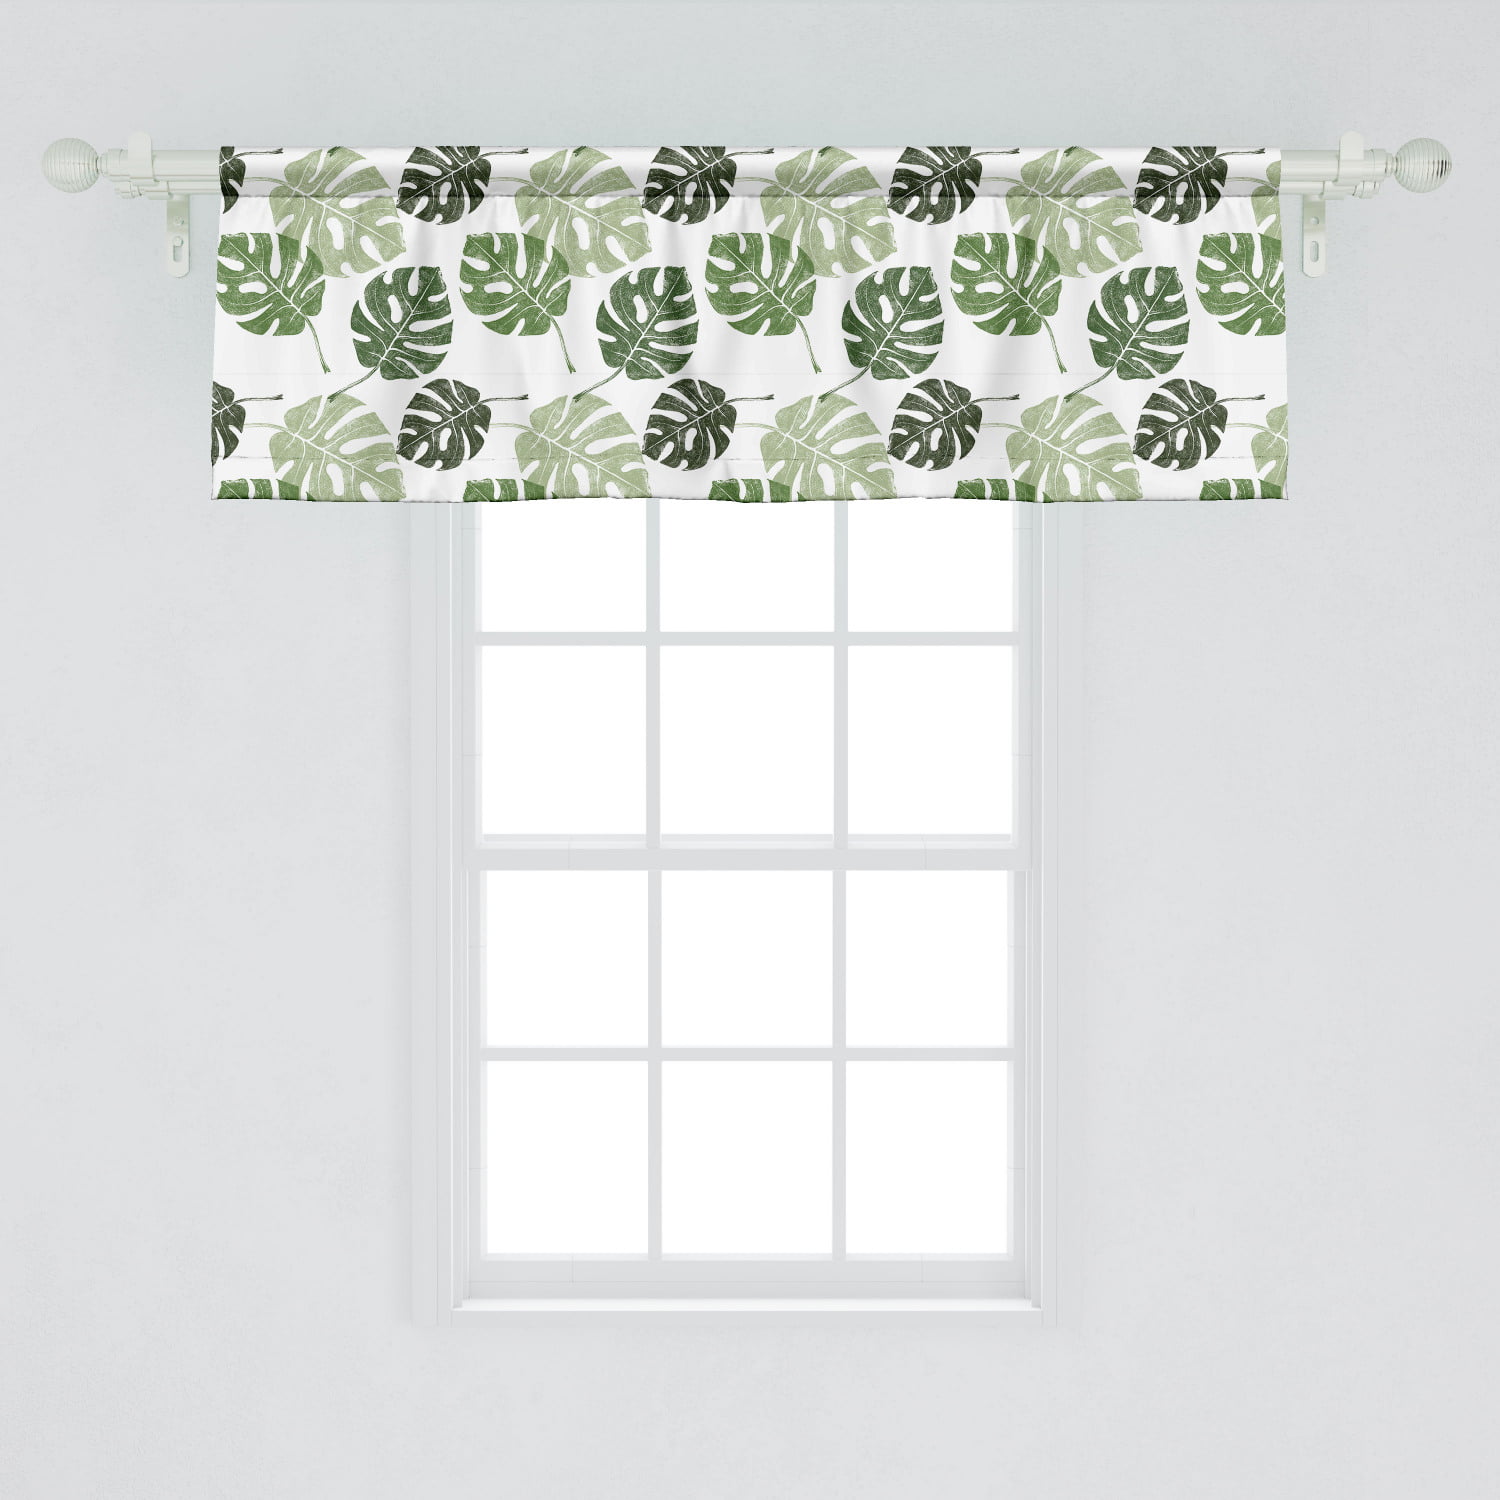 Ambesonne Monstera Window Valance, Tropical Jungle Foliage Hawaiian Nature  Growth Sketchy Leaves Environment Eco, Curtain Valance for Kitchen Bedroom  ...